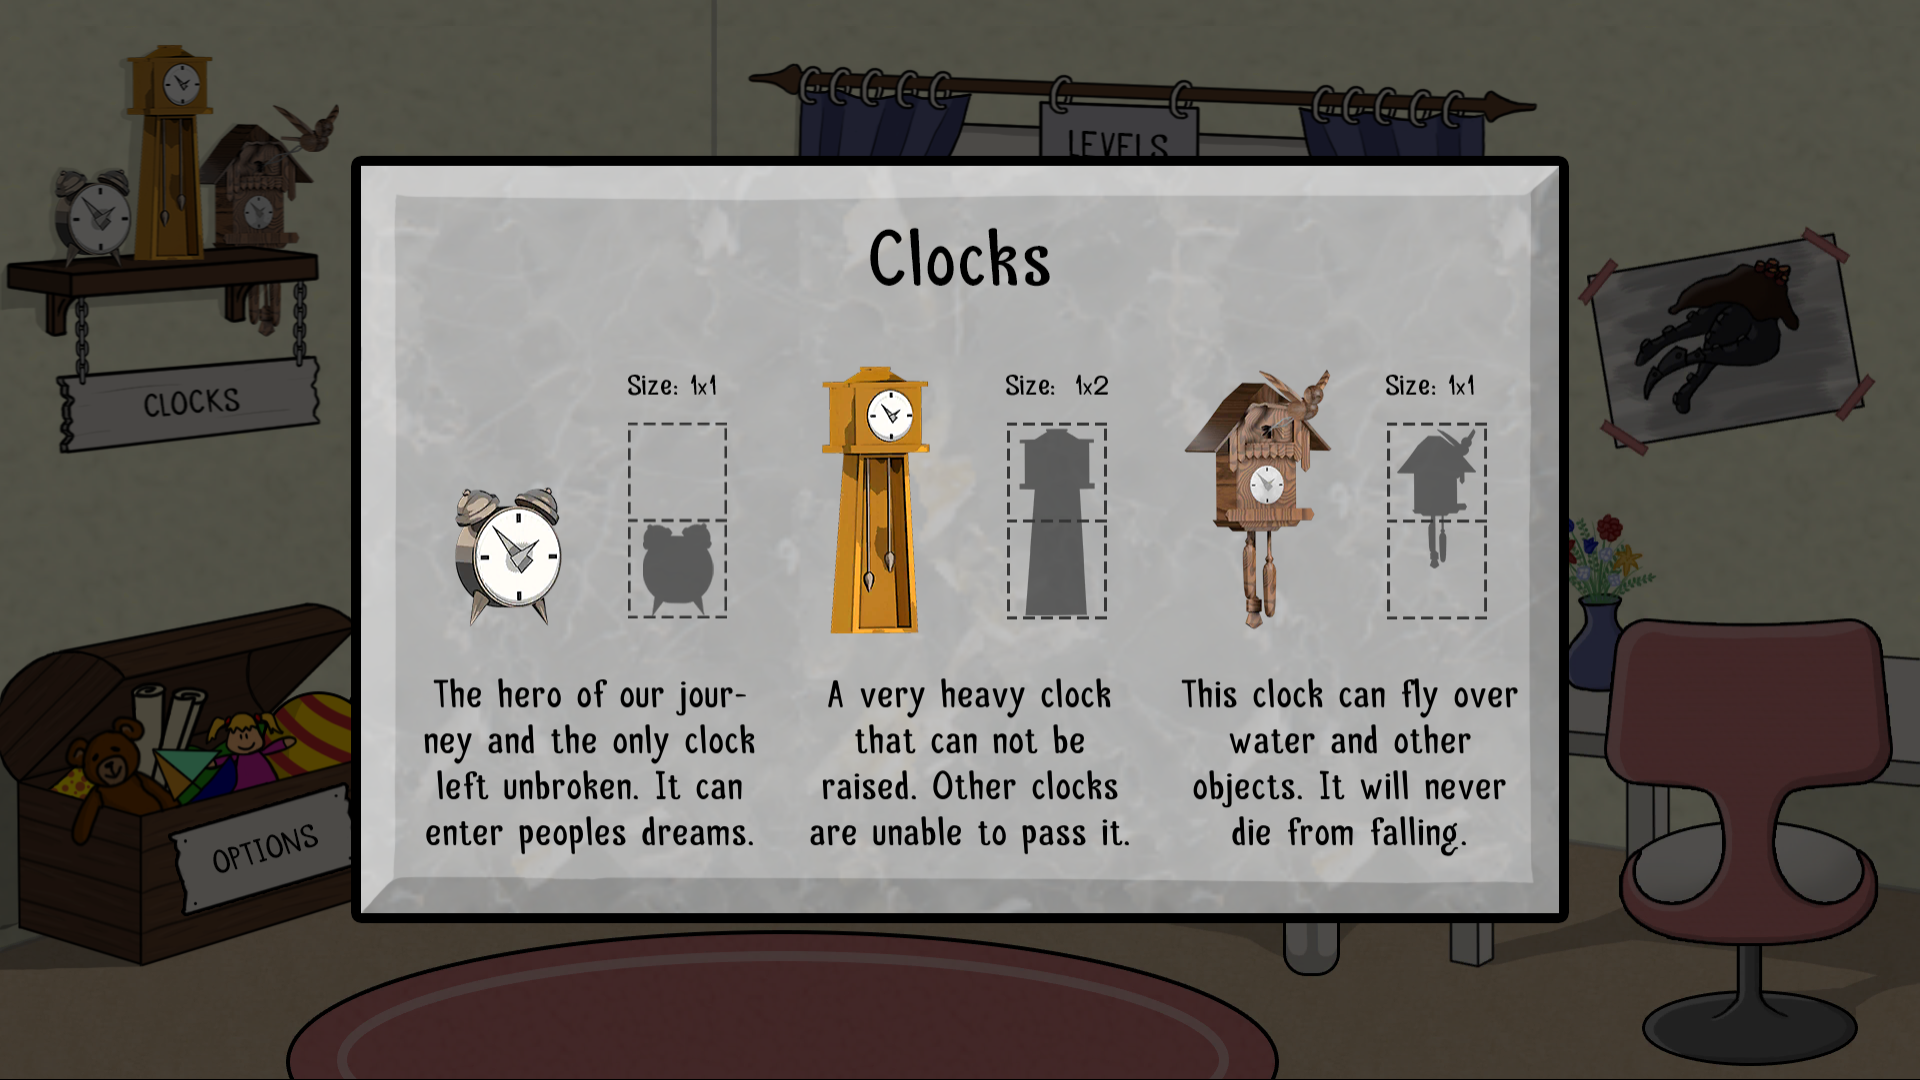 Screenshot of the game Wake that shows the different clocks. On the left side is an alarm clock. Below the description: 'The hero of our journey and the only clock left unbroken. It can enter peoples dreams.' In the center is a grandfather clock. Below the description: 'A very heavy clock that can not be raised. Other clocks are unable to pass it.' At the right side is a cuckoo clock. Below the description: 'This clock can fly over water and other objects. It will never die from falling.'